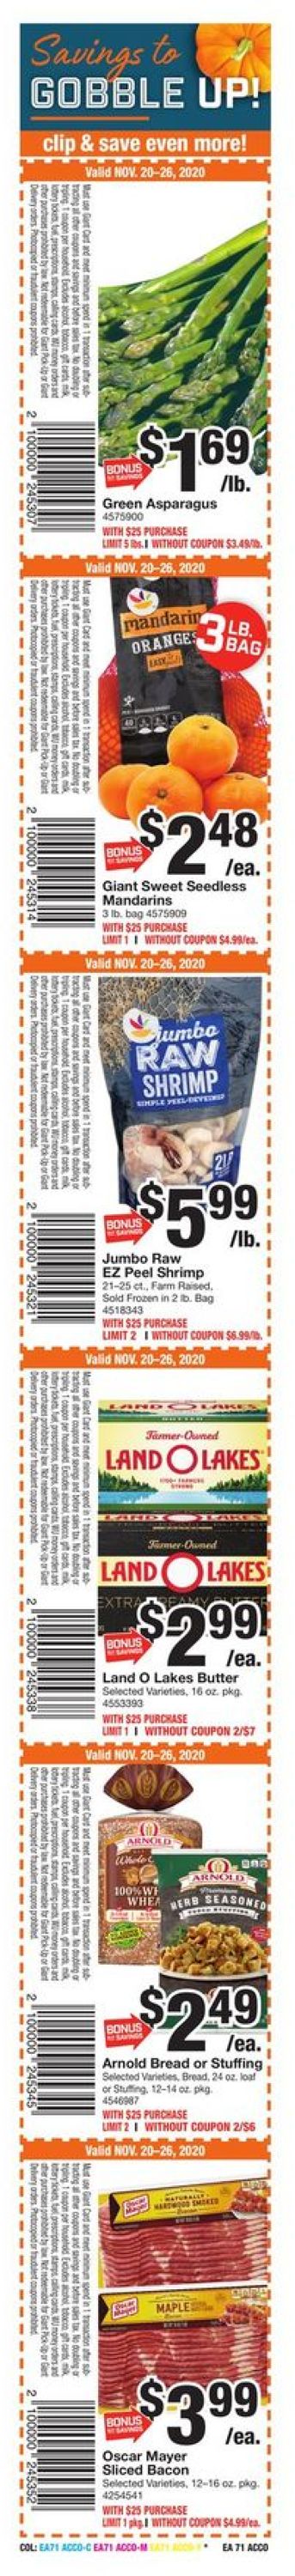 Giant Food Thanksgiving 2020 Weekly Ad Circular - valid 11/20-11/26/2020 (Page 2)